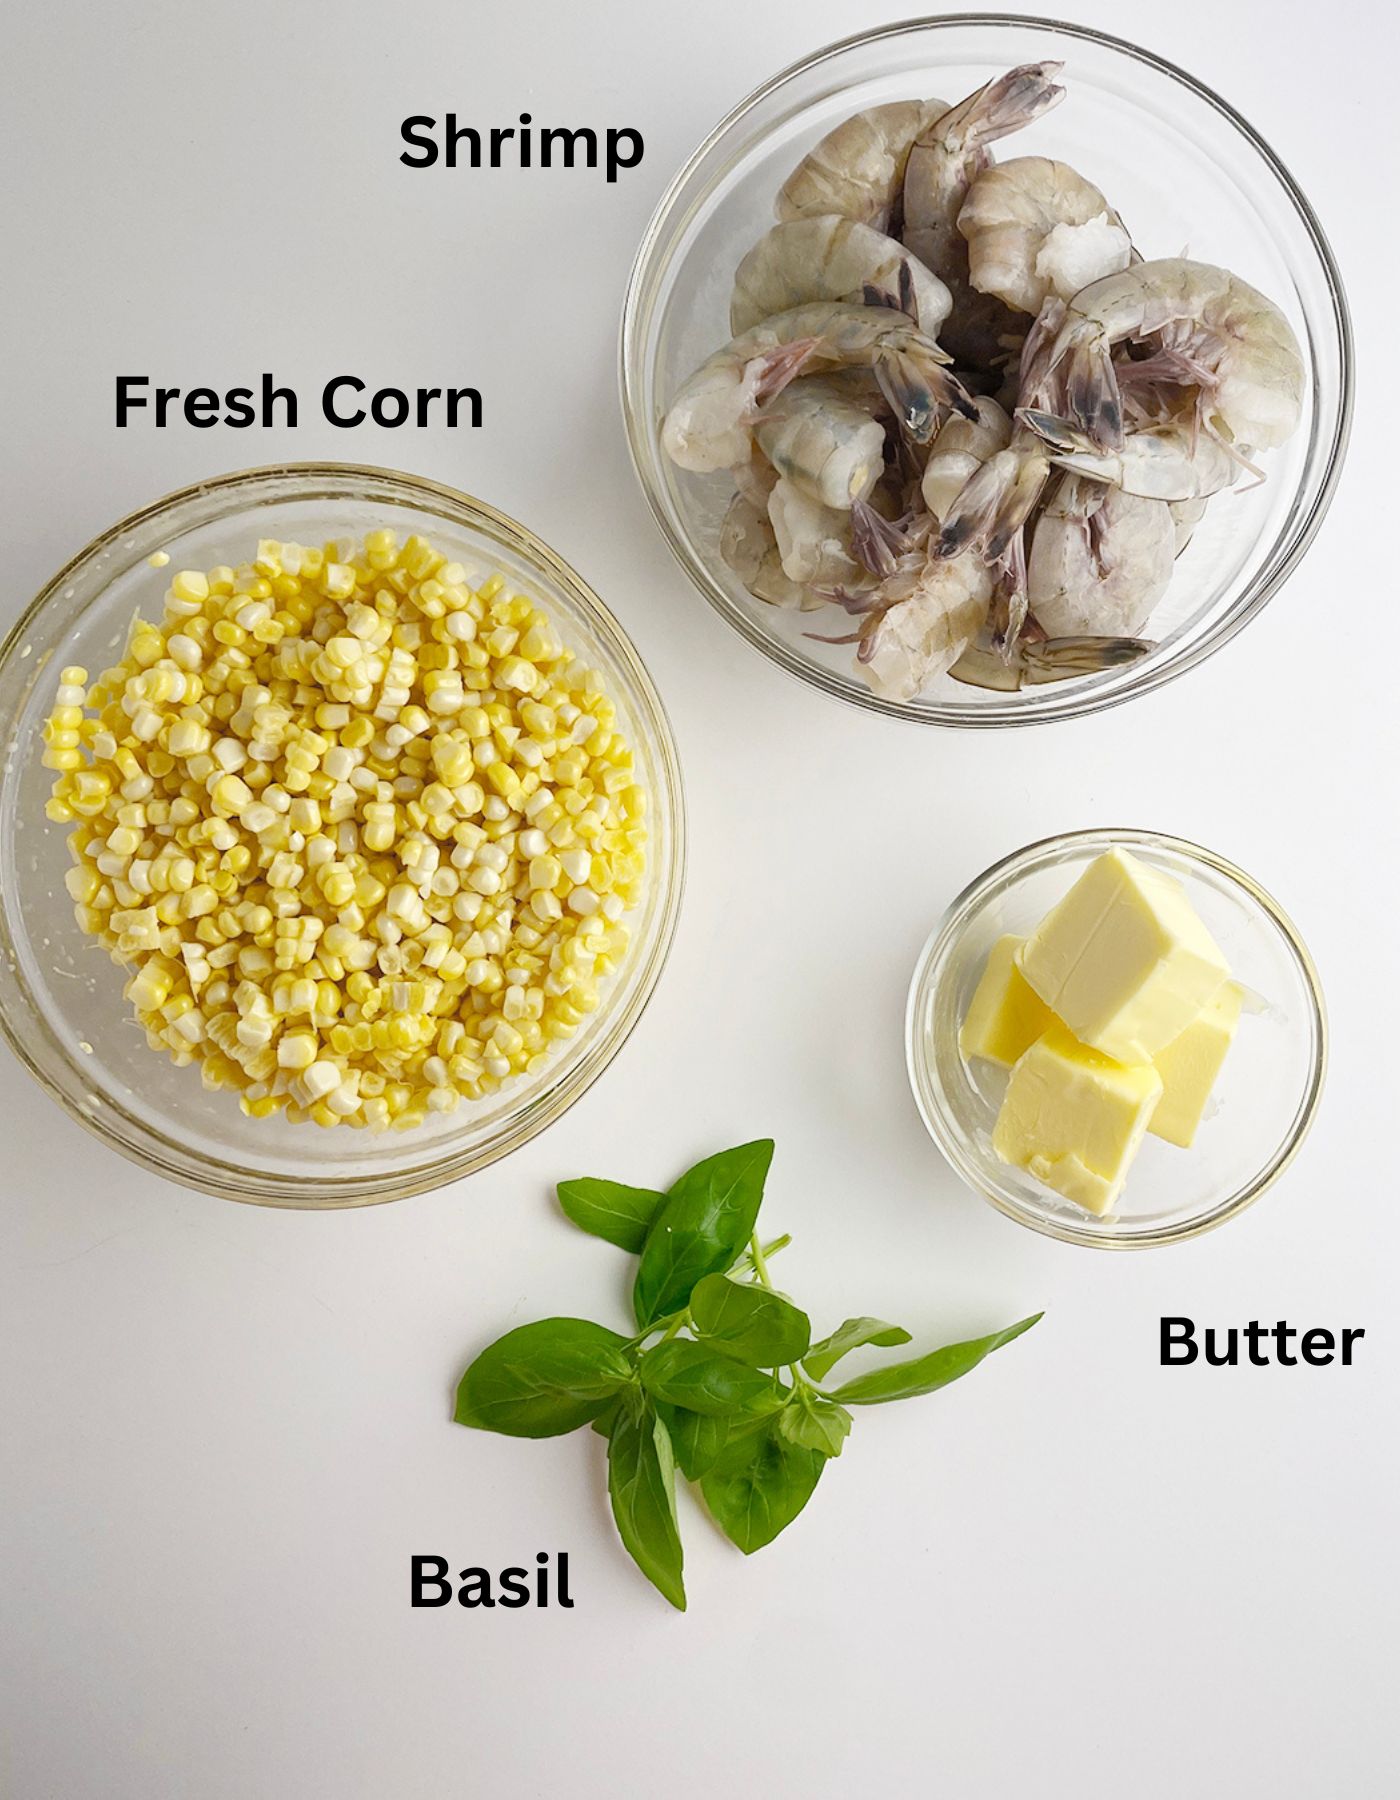 ingredients needed for buttered shrimp with corn